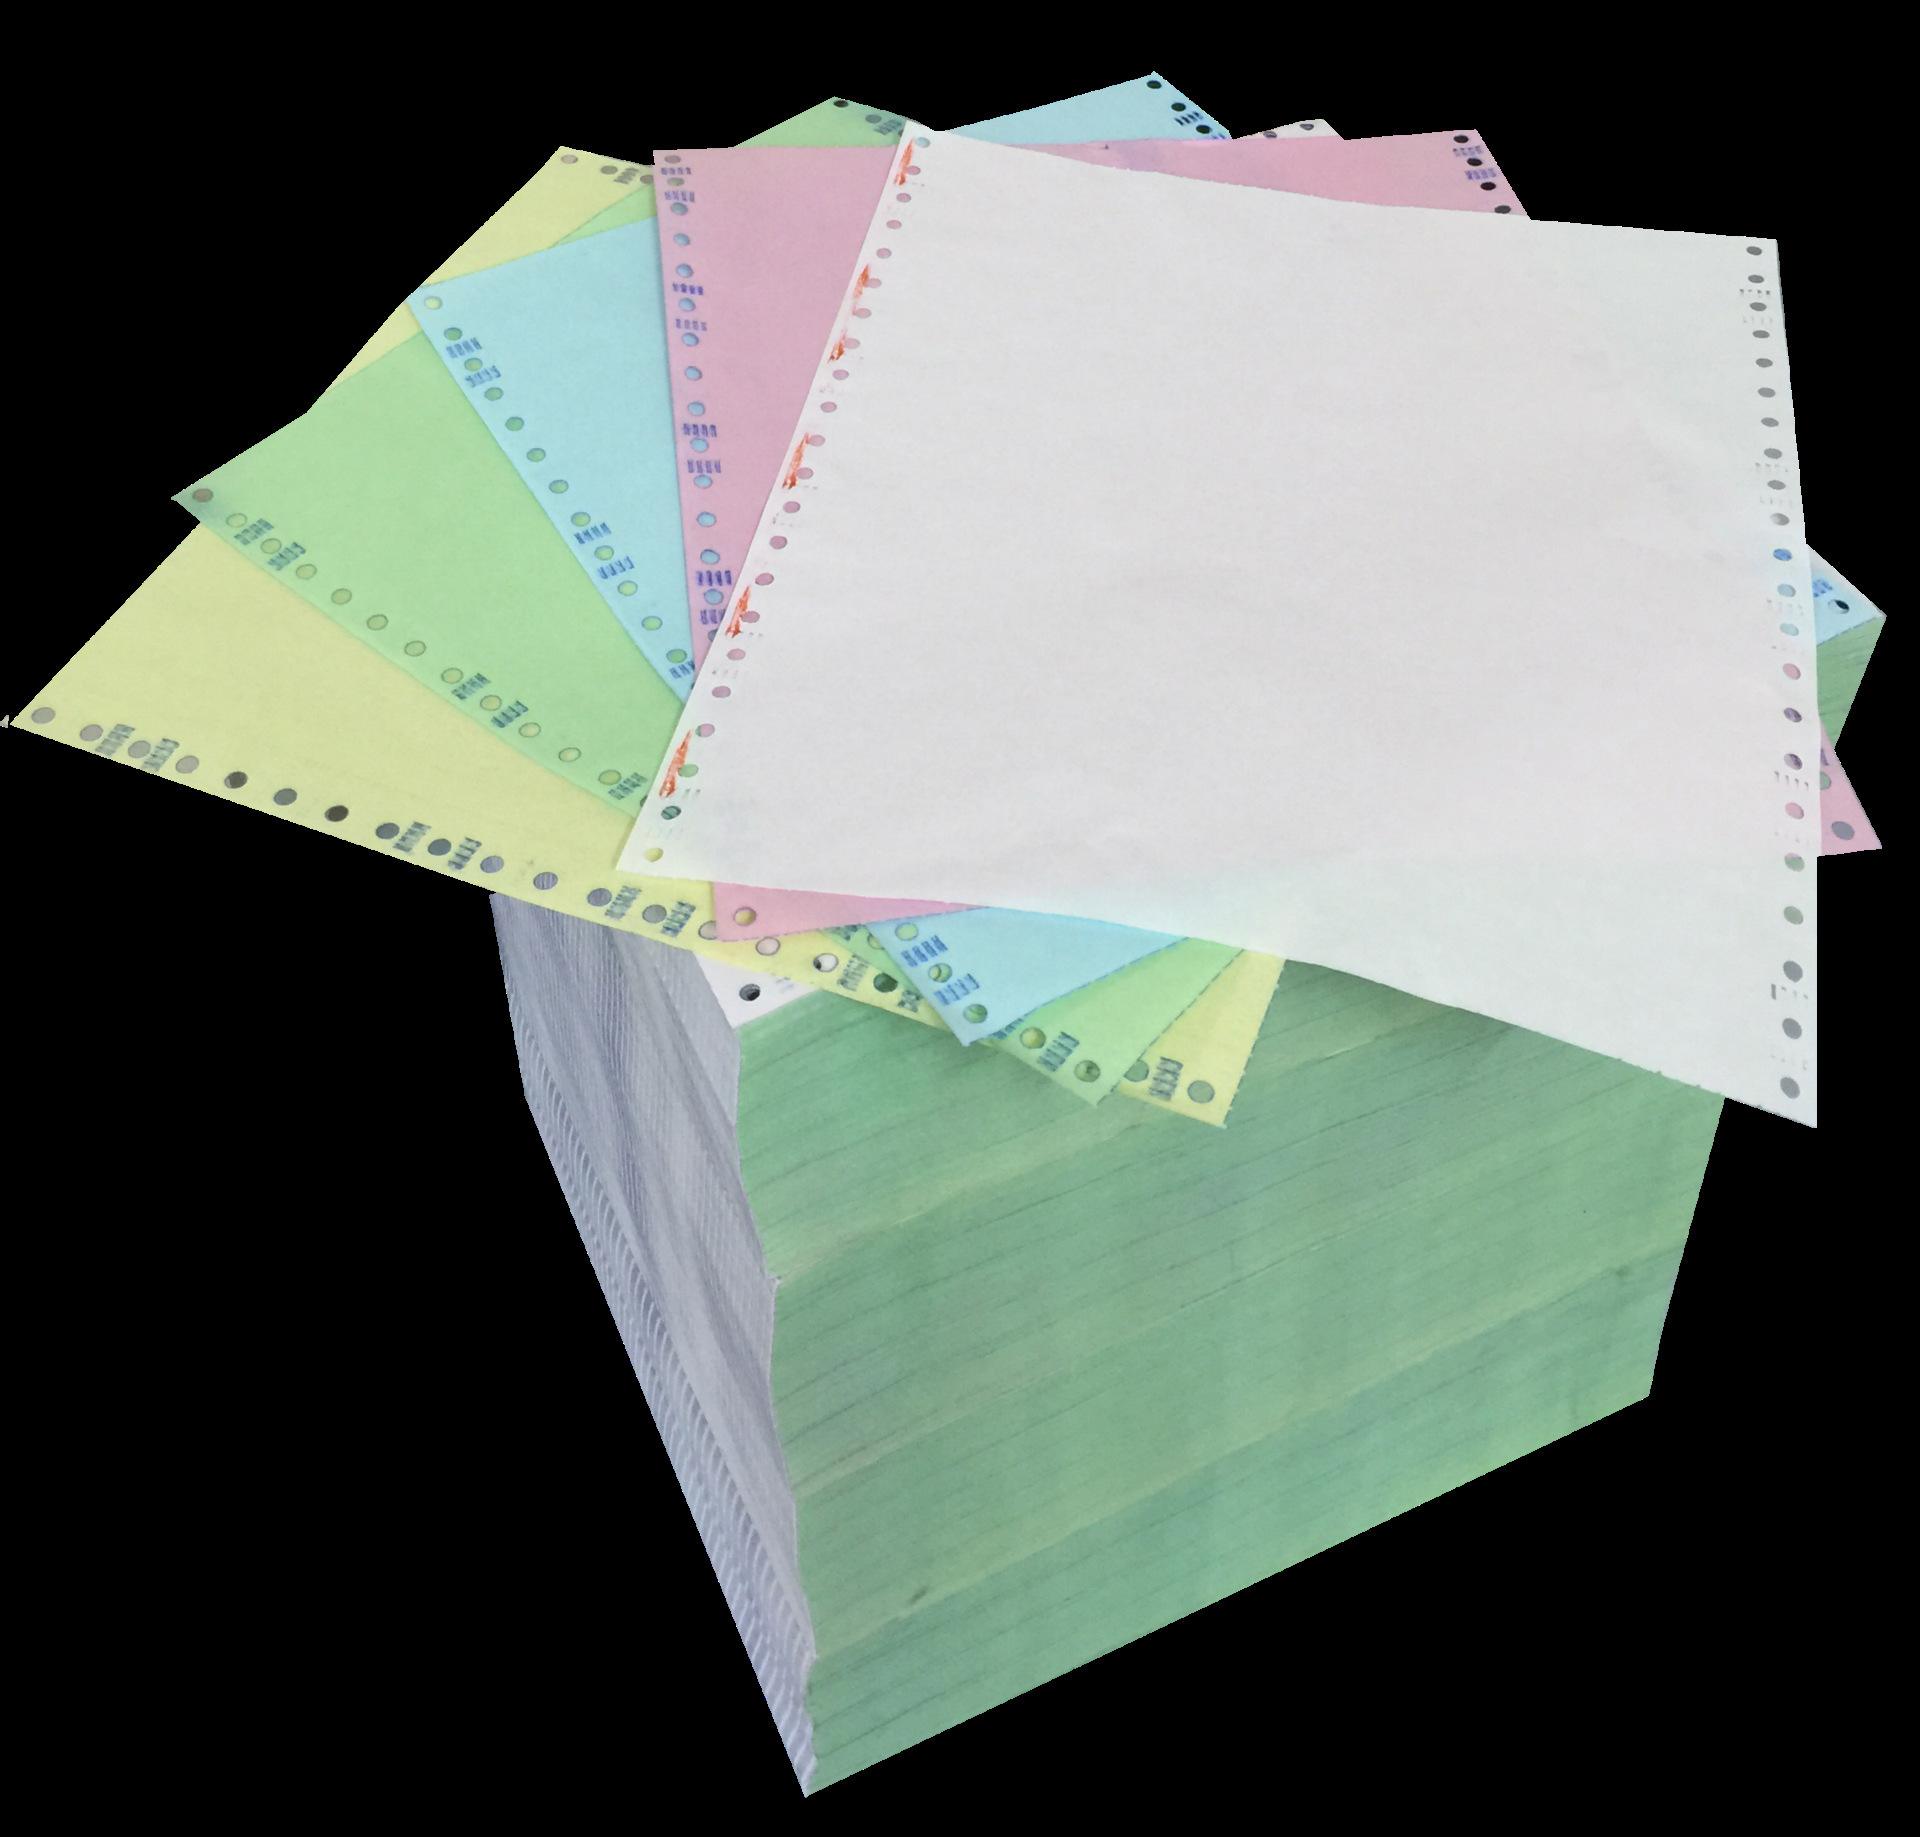 What size is regular printer paper? Printer paper is a ubiquitous office supply that serves as the foundation for printed documents